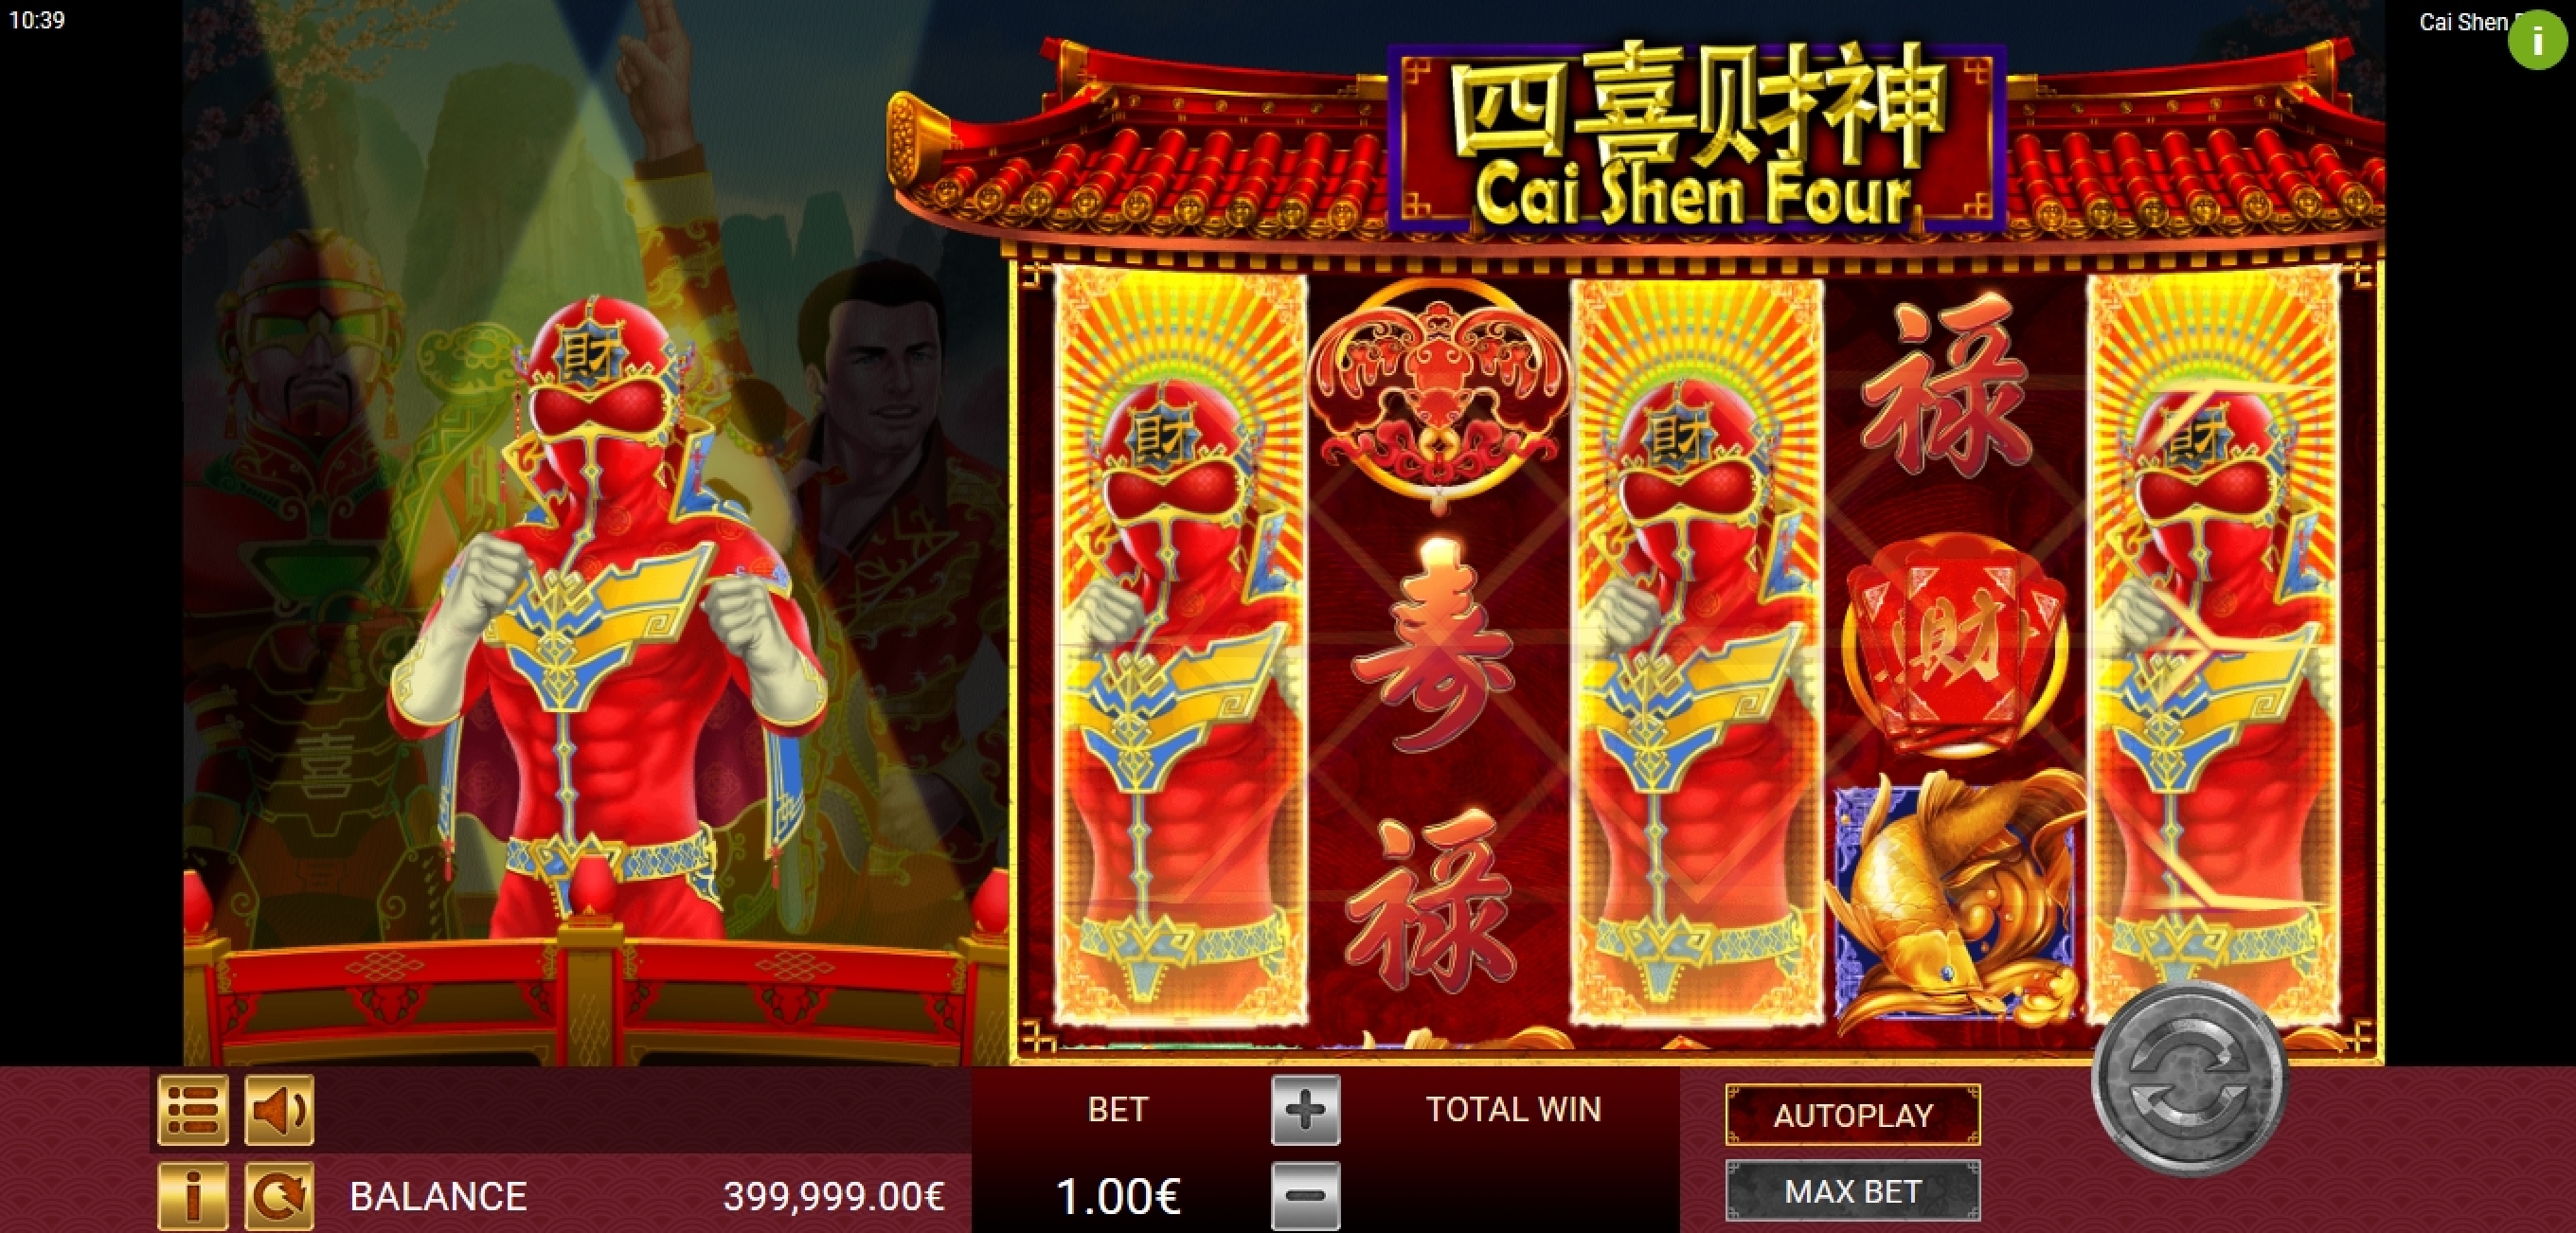 Win Money in Cai Shen Four Free Slot Game by Gamatron